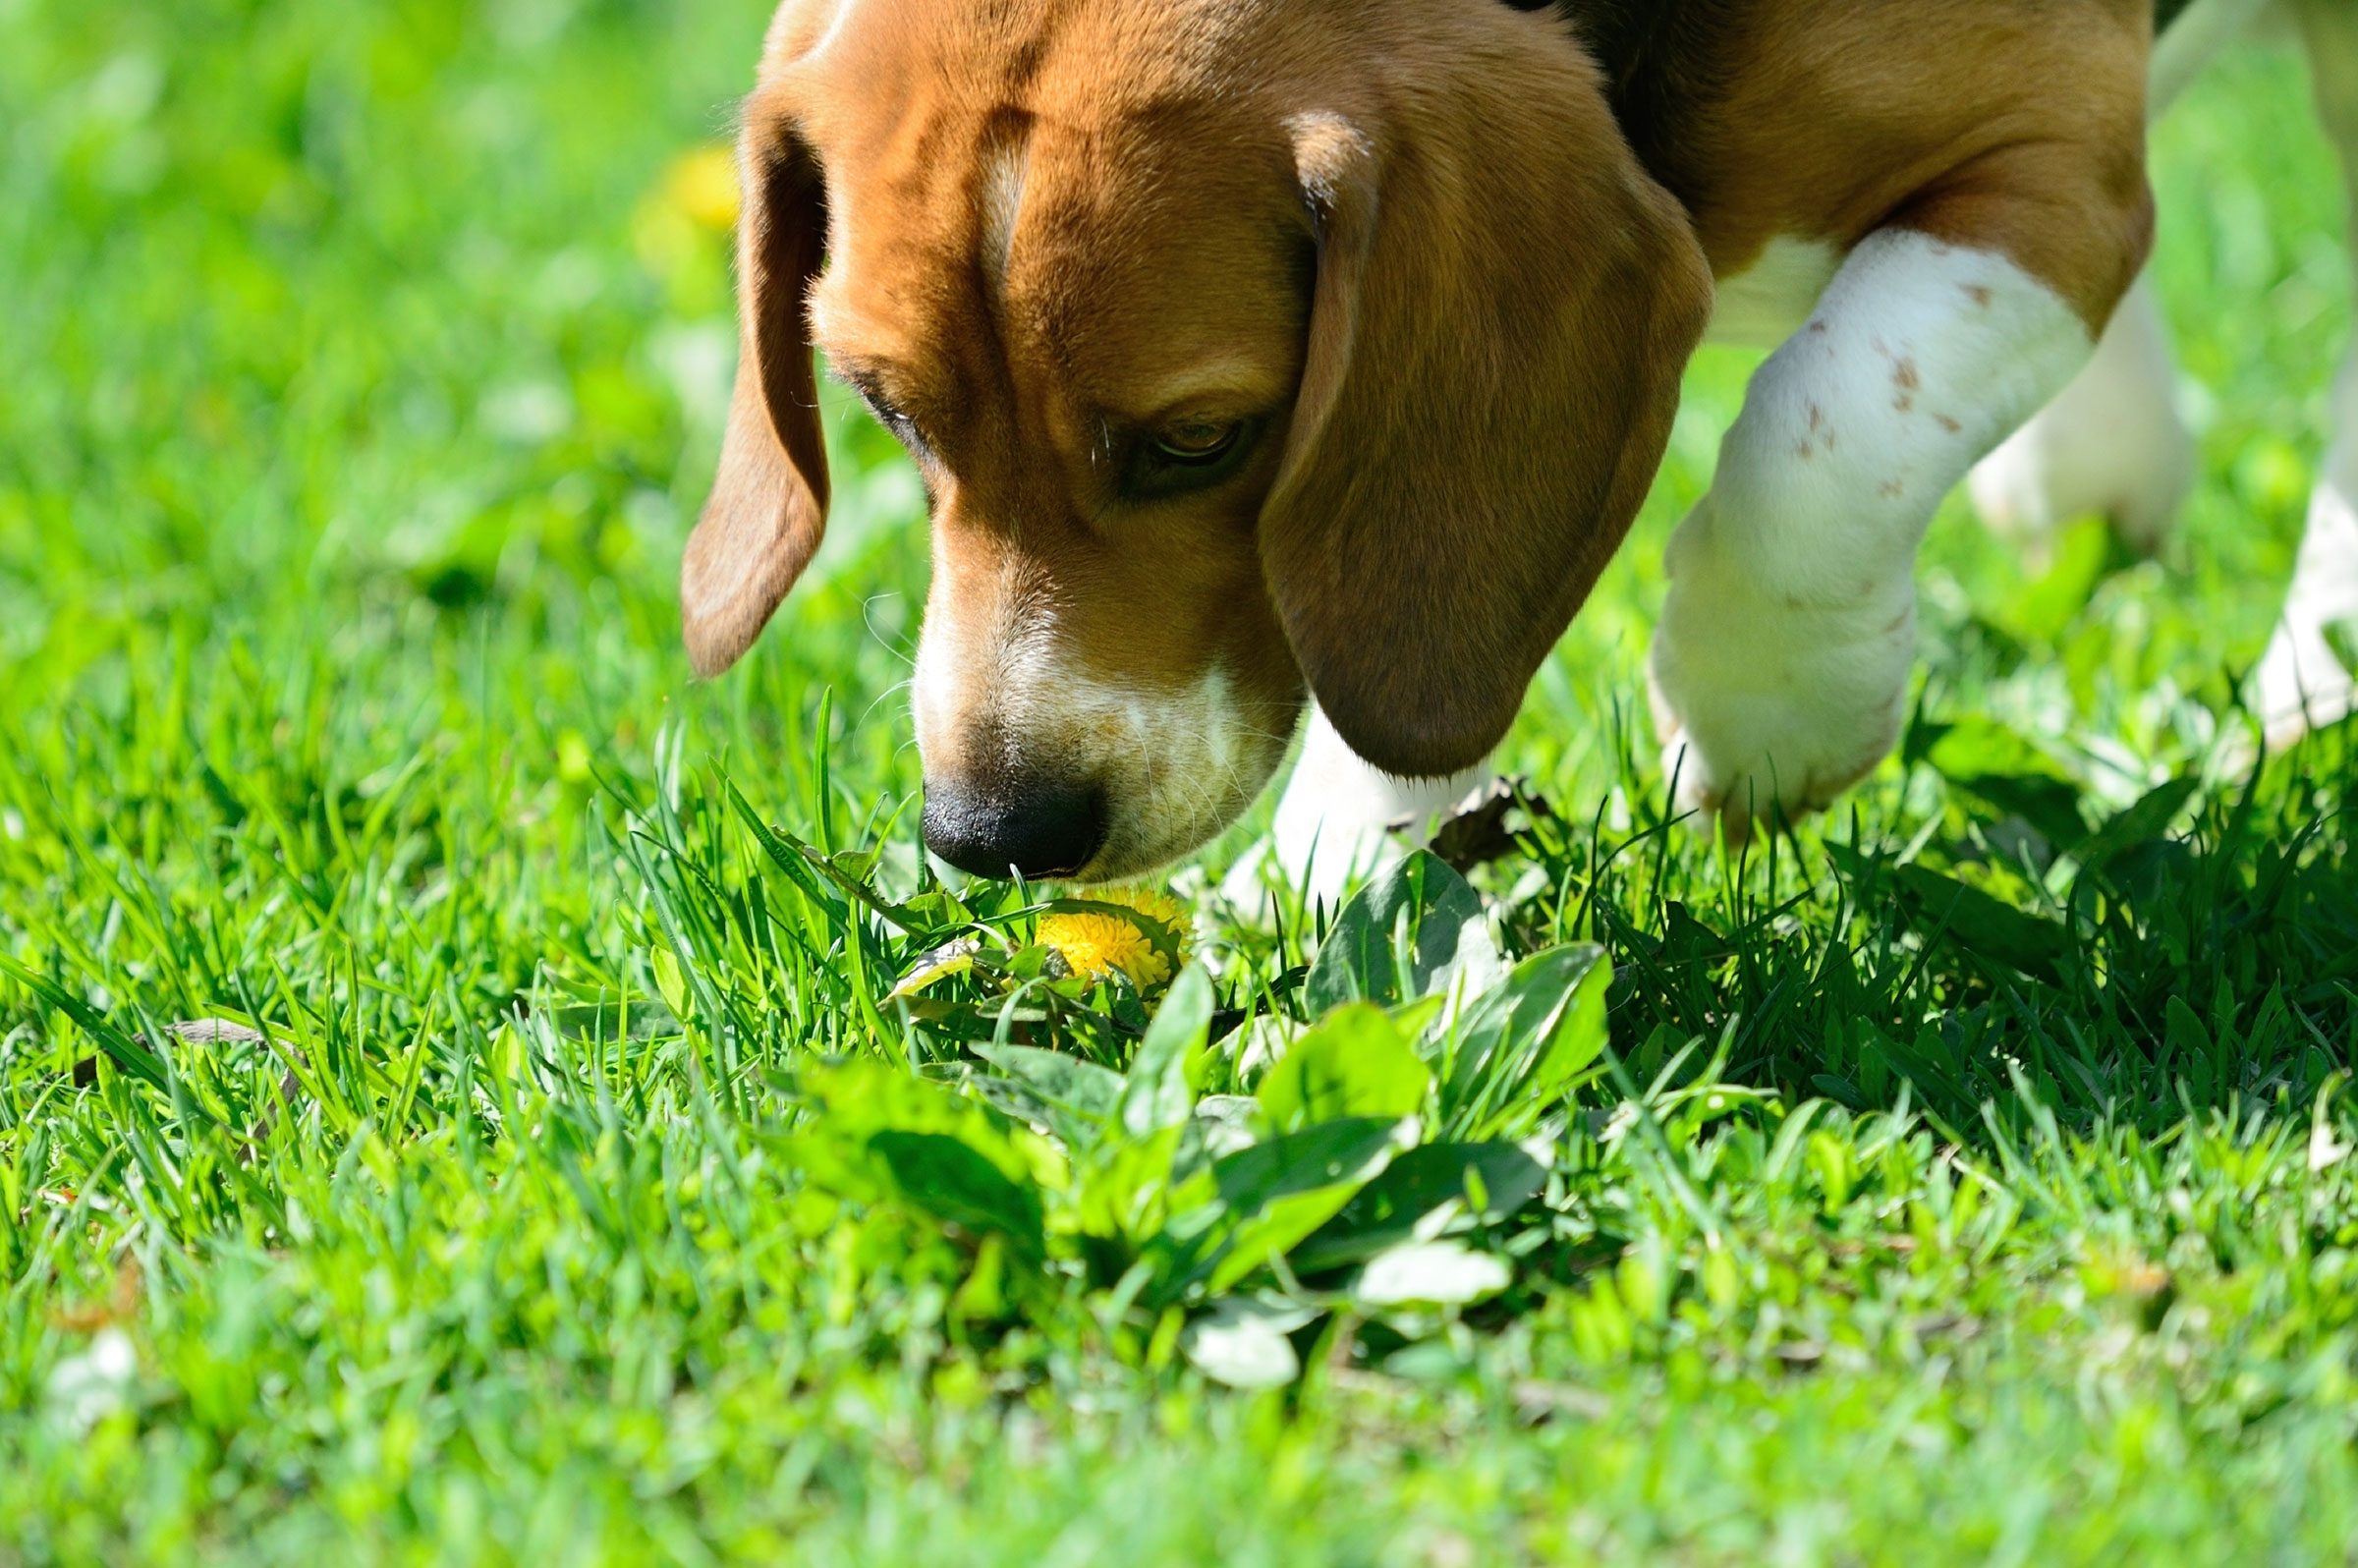 How to Train Your Puppy: 5 Things to Train First | Reader's Digest